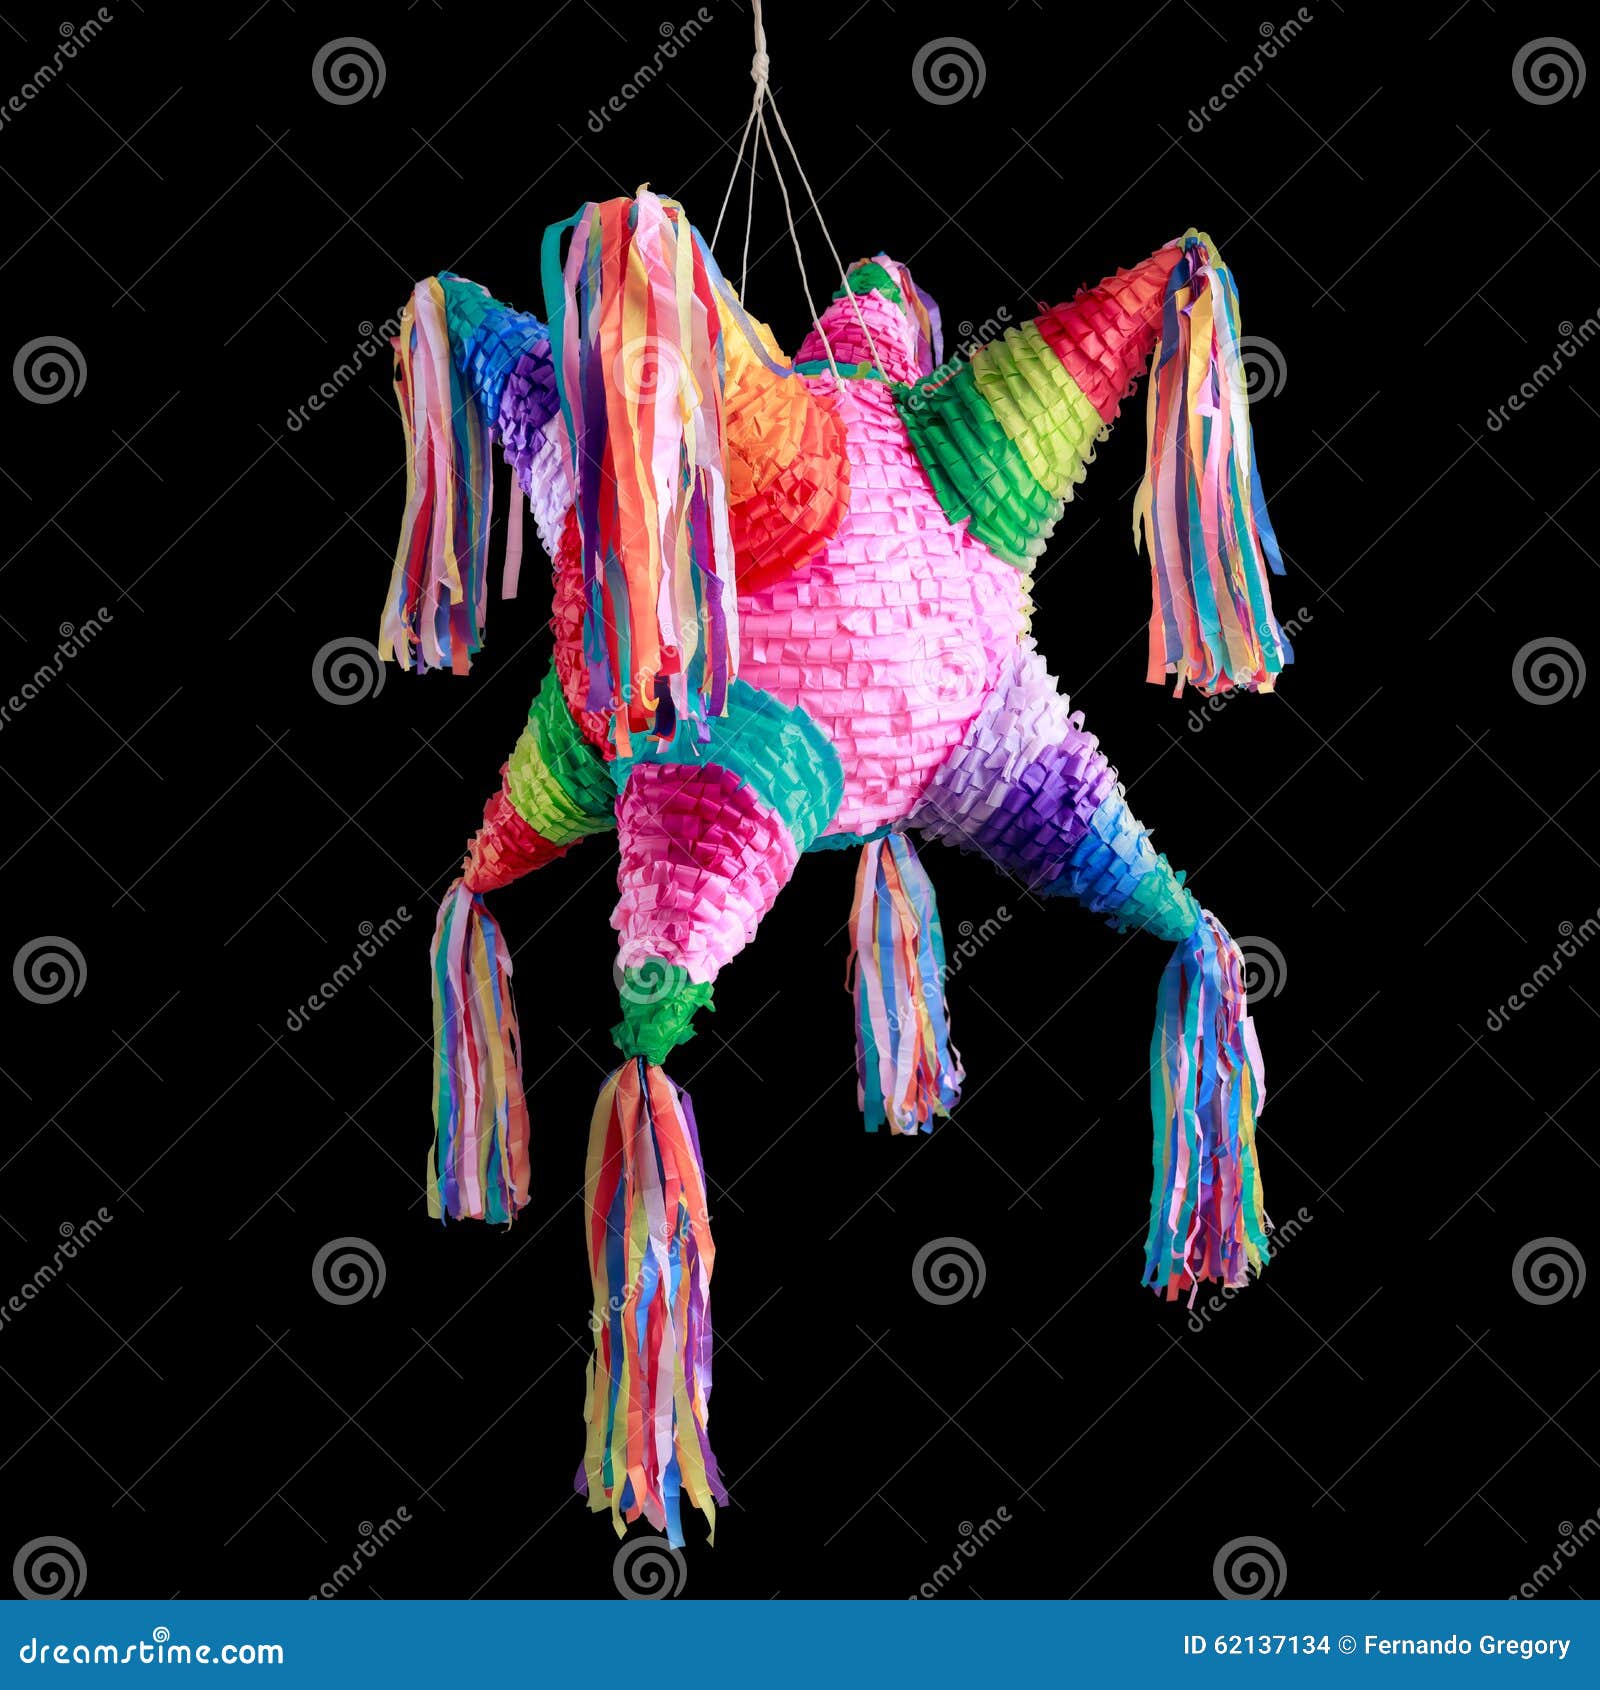 mexican pinata used in posadas and birthdays